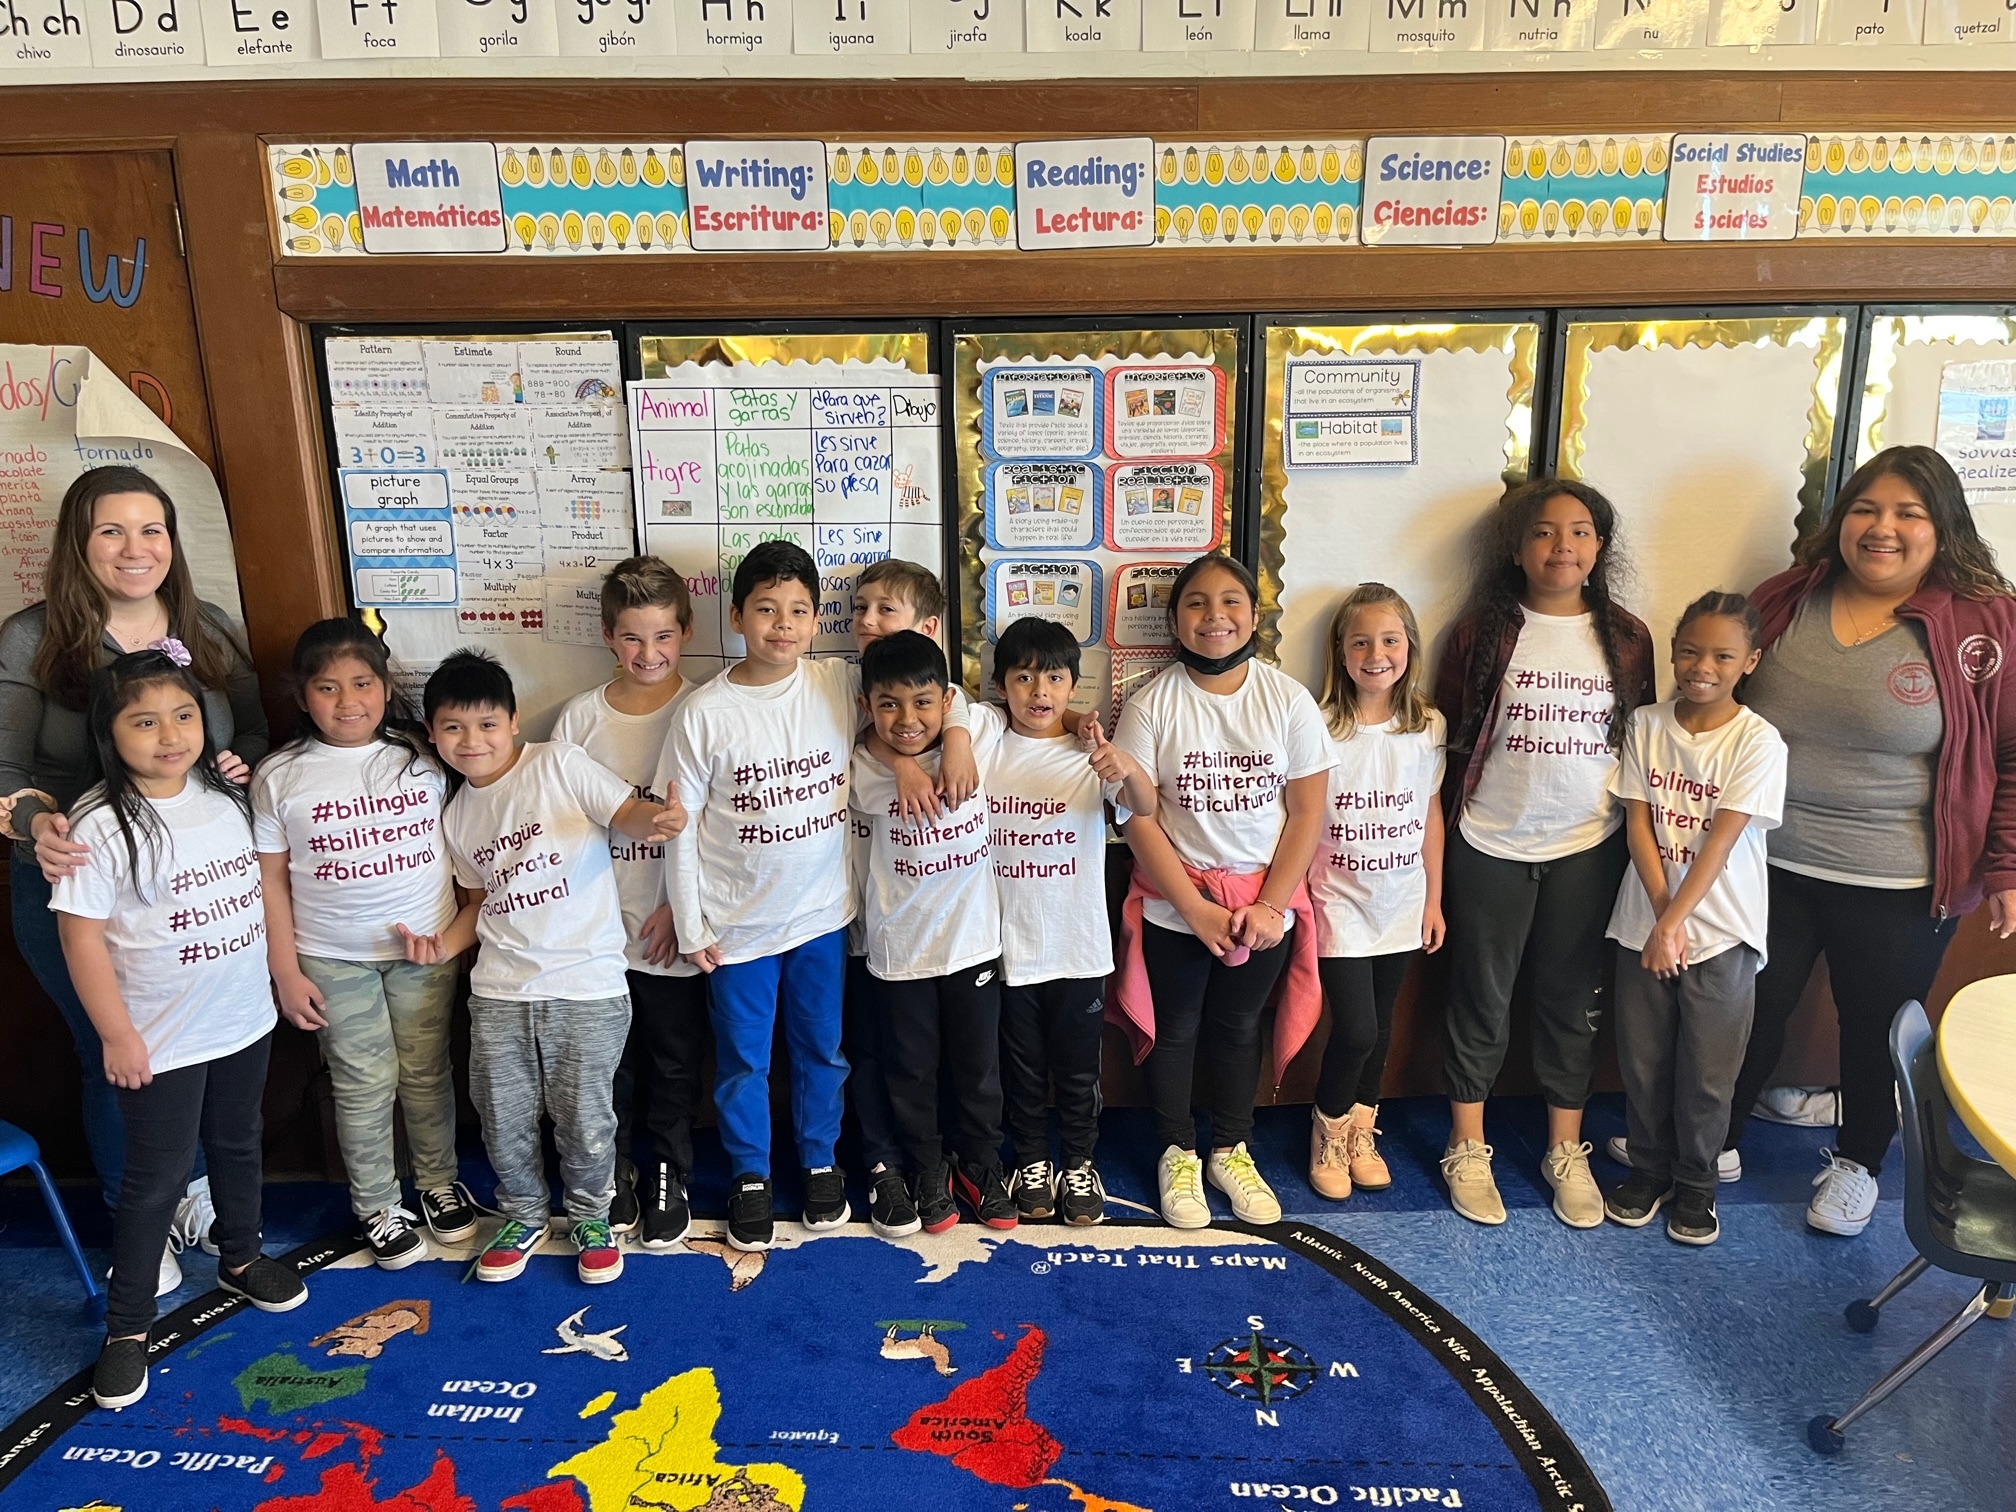 To unify students and promote positivity, Southampton Elementary School third-grade dual language teachers Jessica Gomez and Stefany Gomez-Barrientos designed a class T-shirt for students to wear on Fridays to school events and on trips. The shirts celebrate the three main goals of the school’s dual language program: bilingualism, biliteracy and biculturalism.